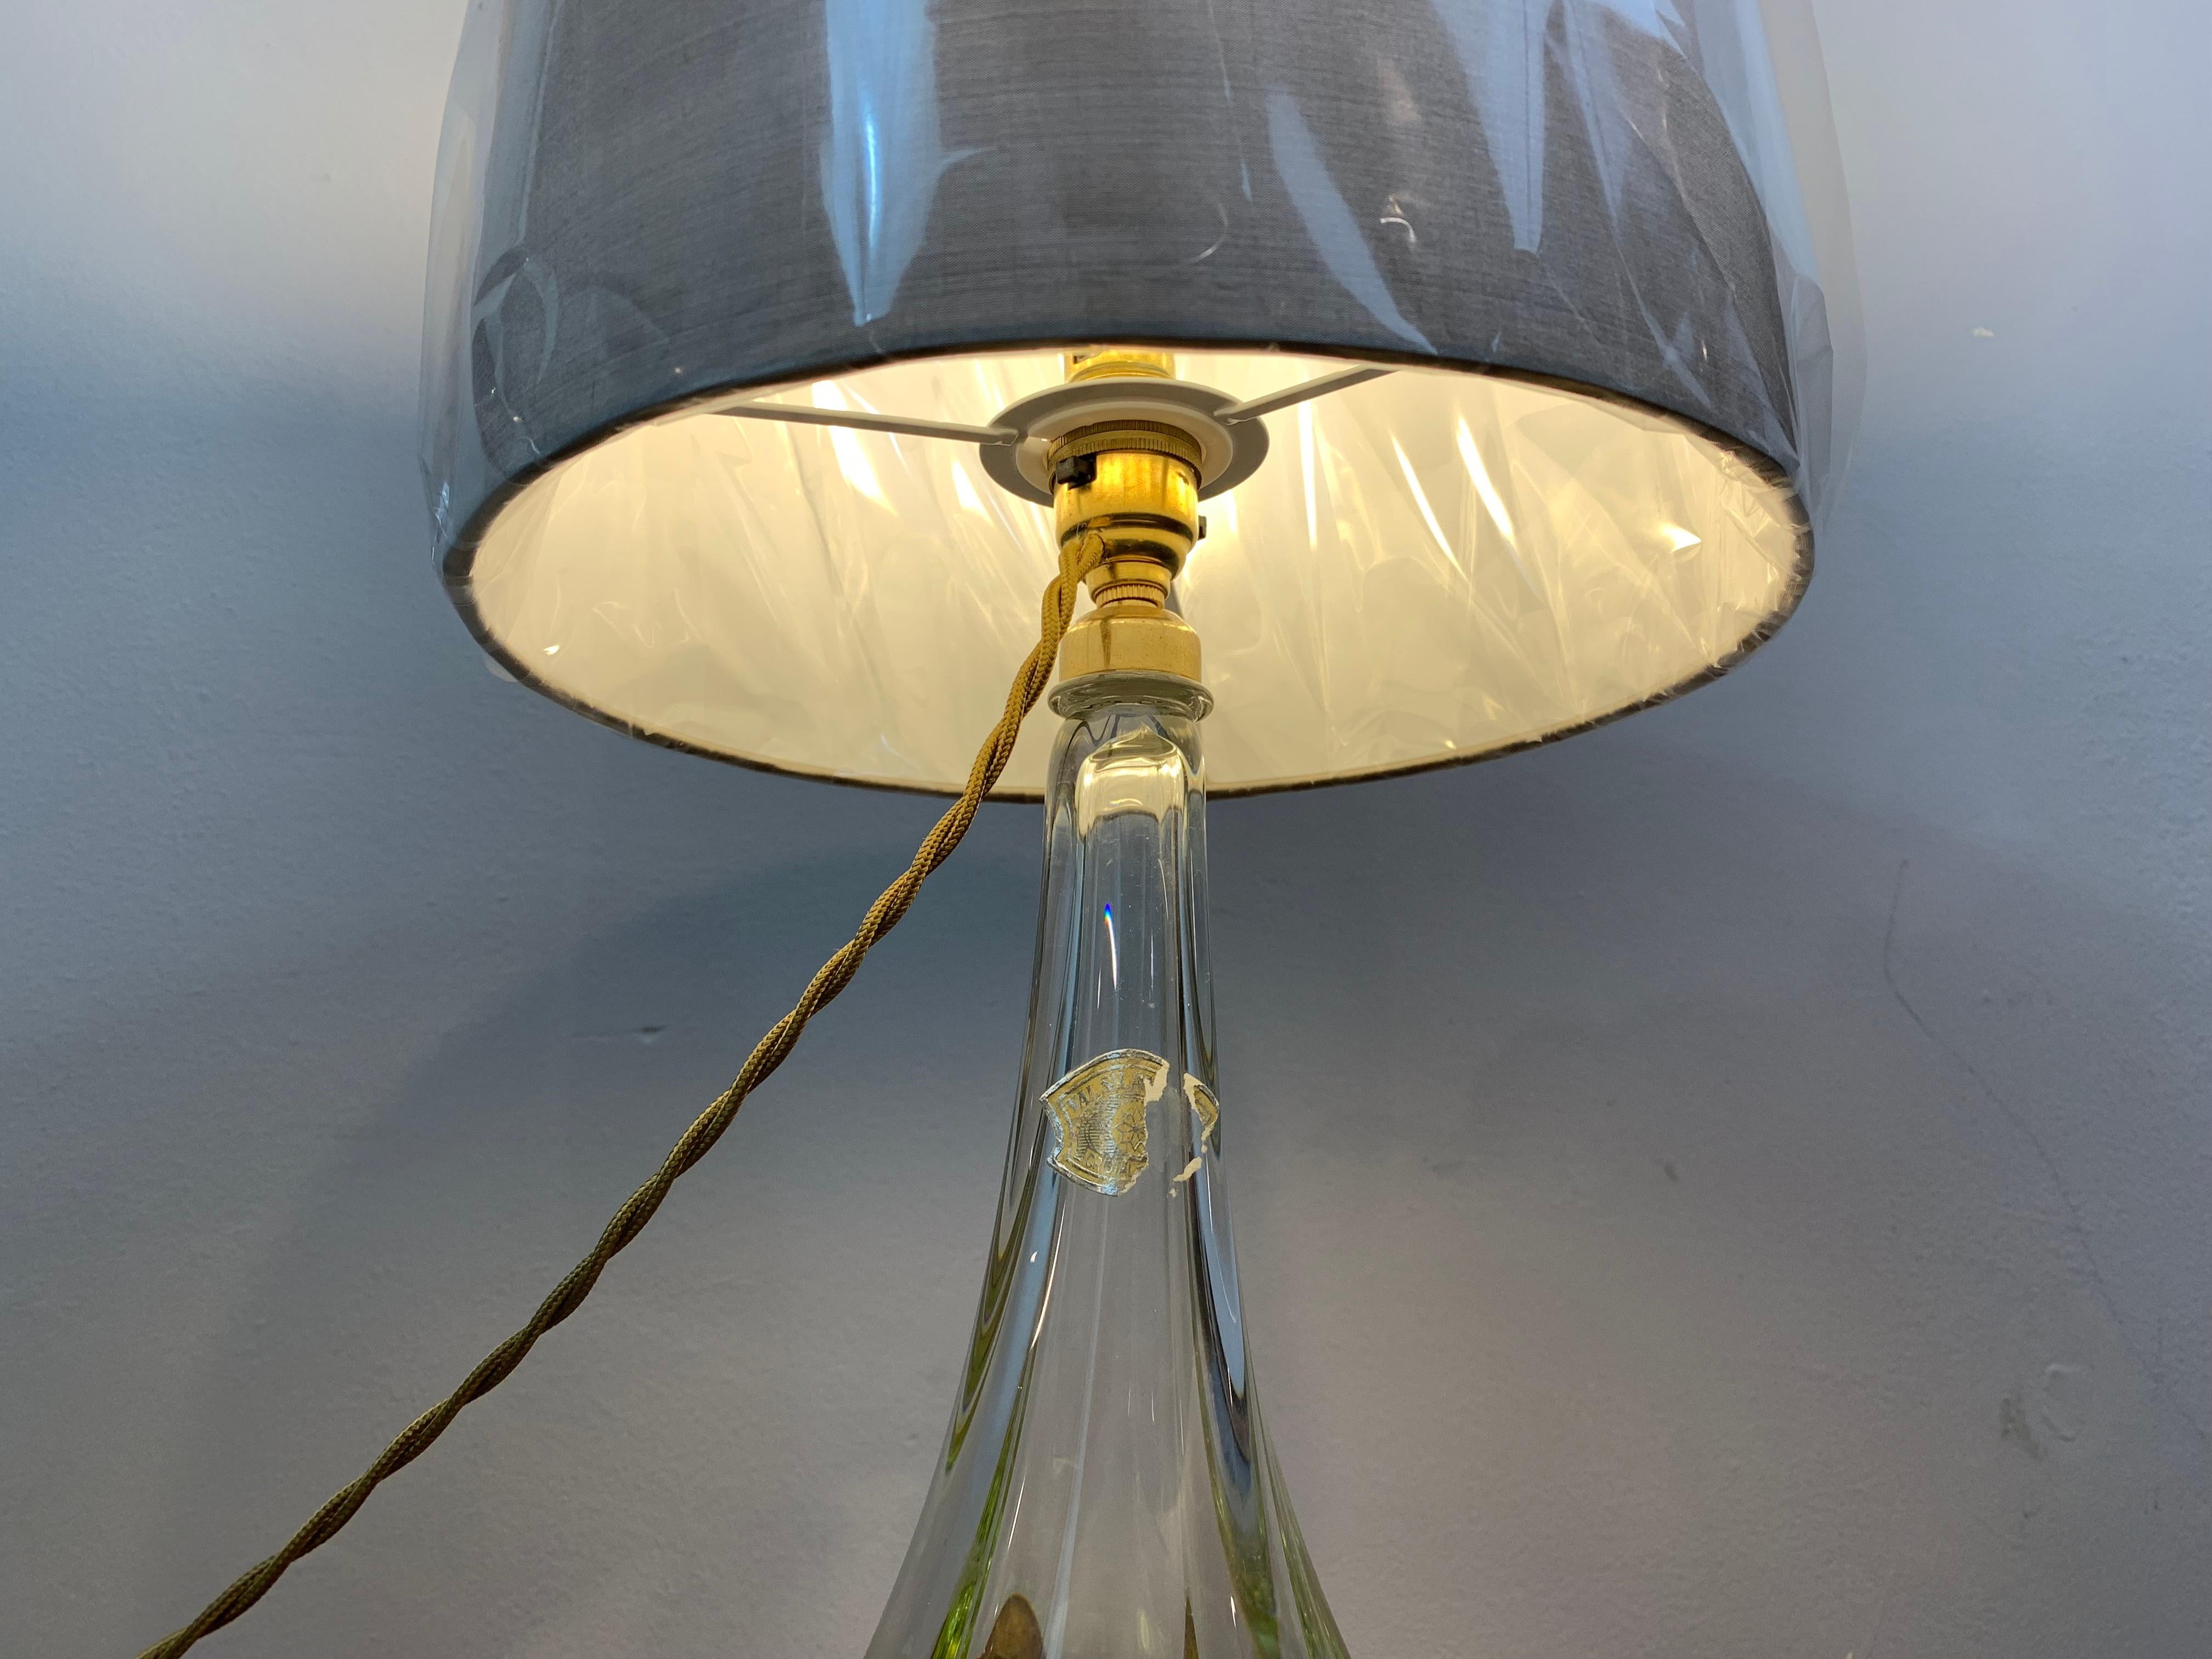 1950s Belgium Val St. Lambert hand blown lime green and clear glass crystal table lamp which includes part of the original manufacturer's label. The lamp is hollow inside and features incised deep grooves running vertically to create a scalloped